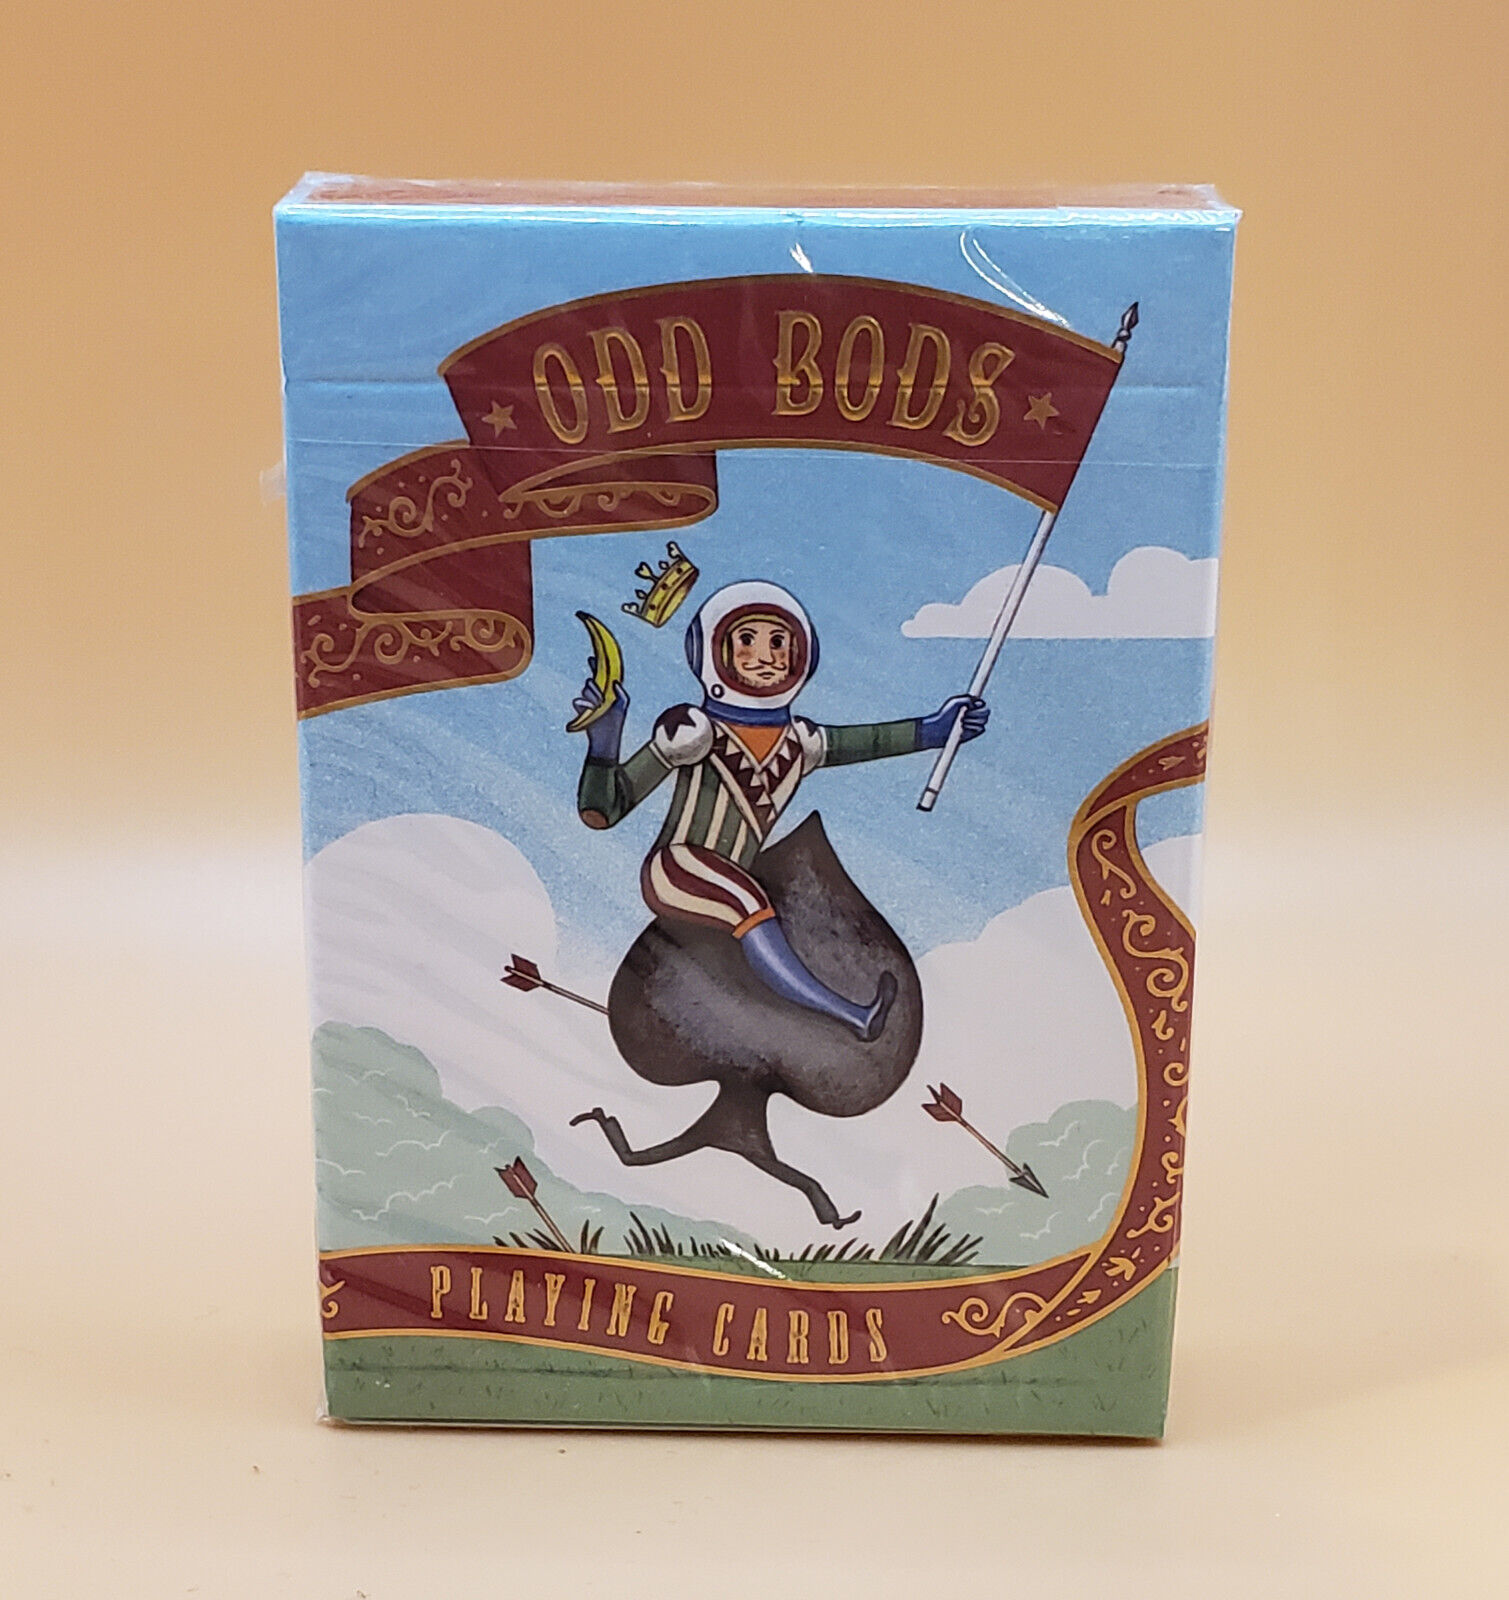 Odd Bods Playing Cards - Art of Play - New Sealed - Limited Edition